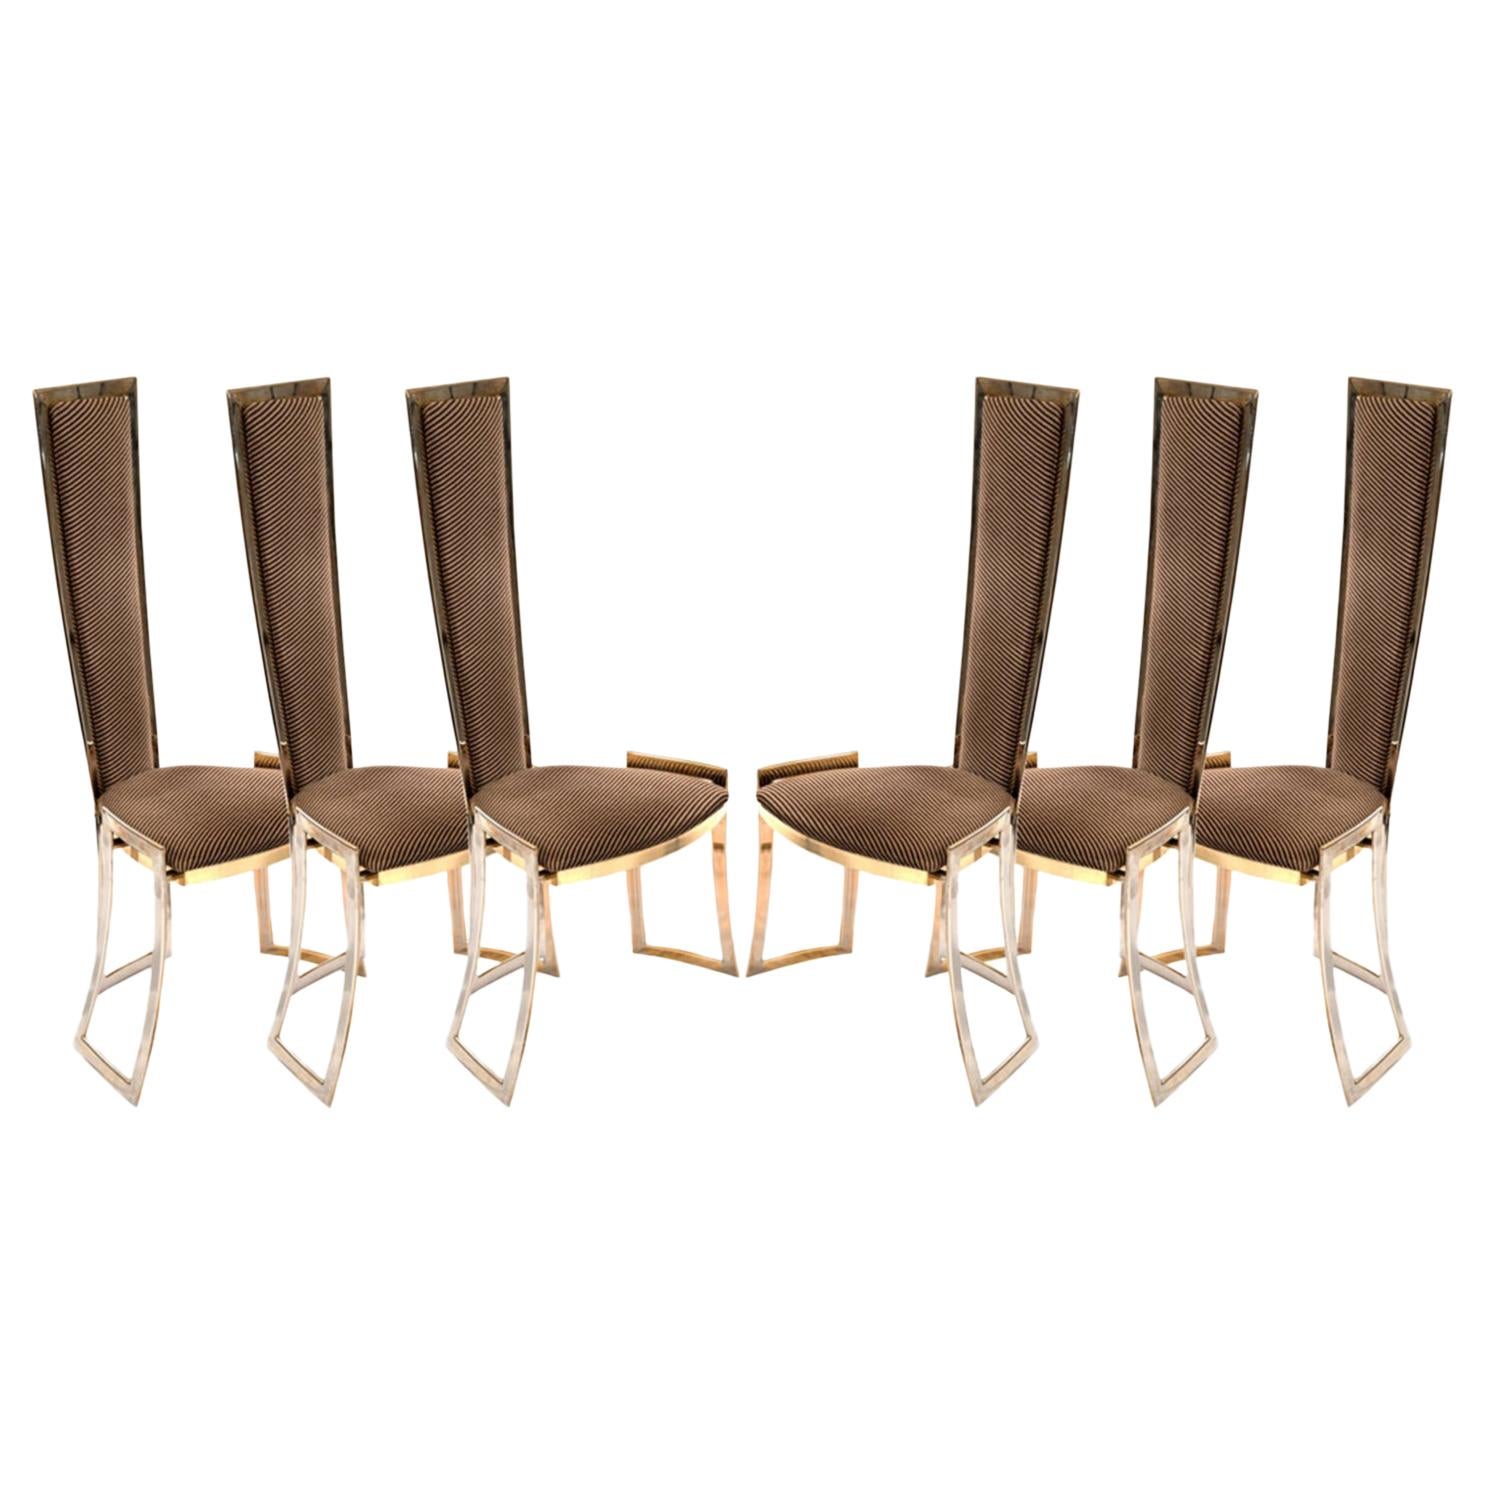 Set of Six High Backed Italian Mid-Century Modern Chairs, circa 1960 For Sale